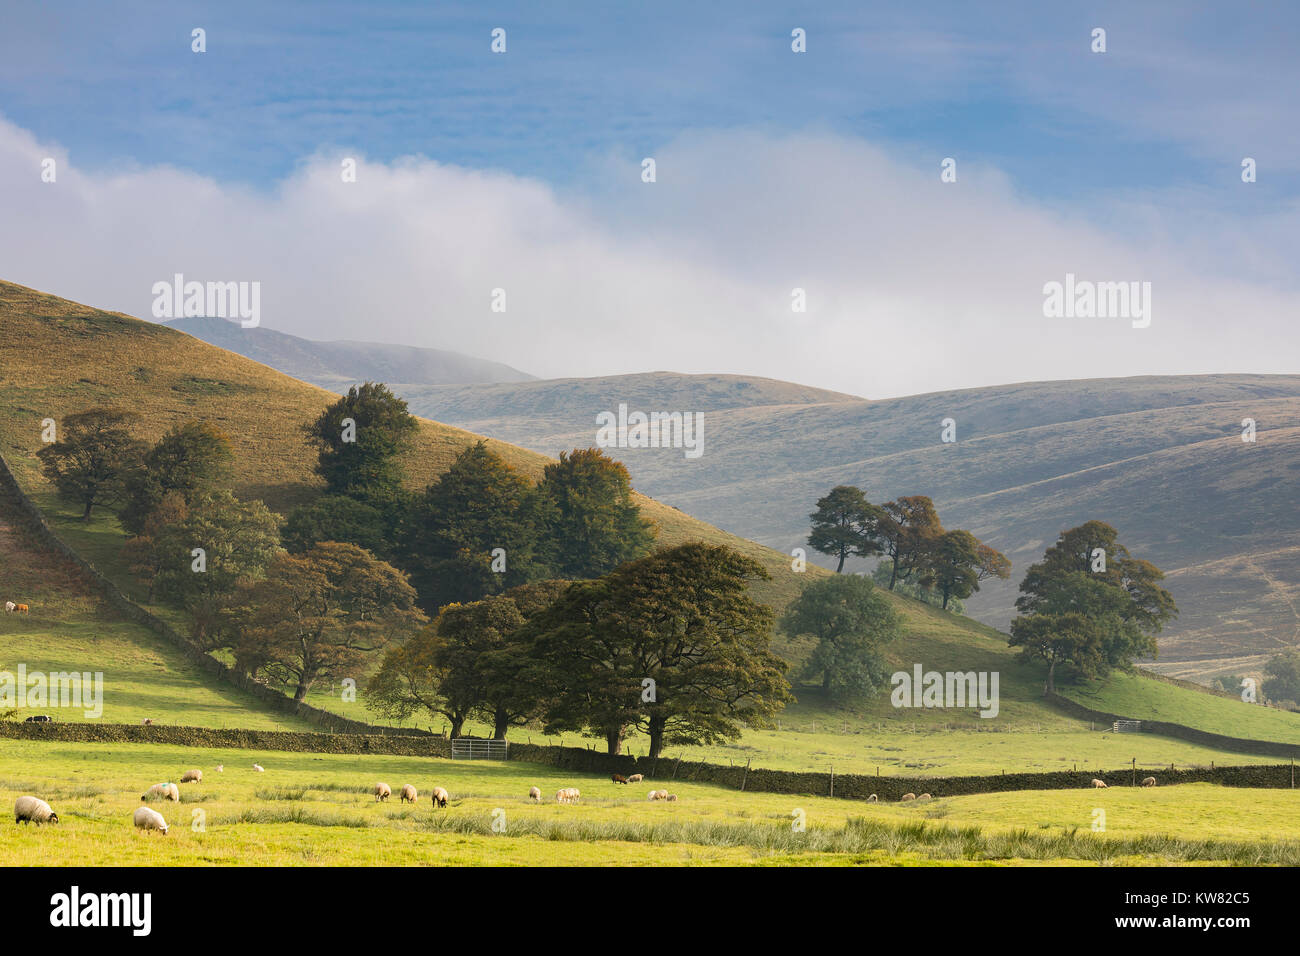 An image of a group of trees in the misty hills of the Vale of Edale, Derbyshire, England, UK. Edale is a part of the peak district national park. Stock Photo